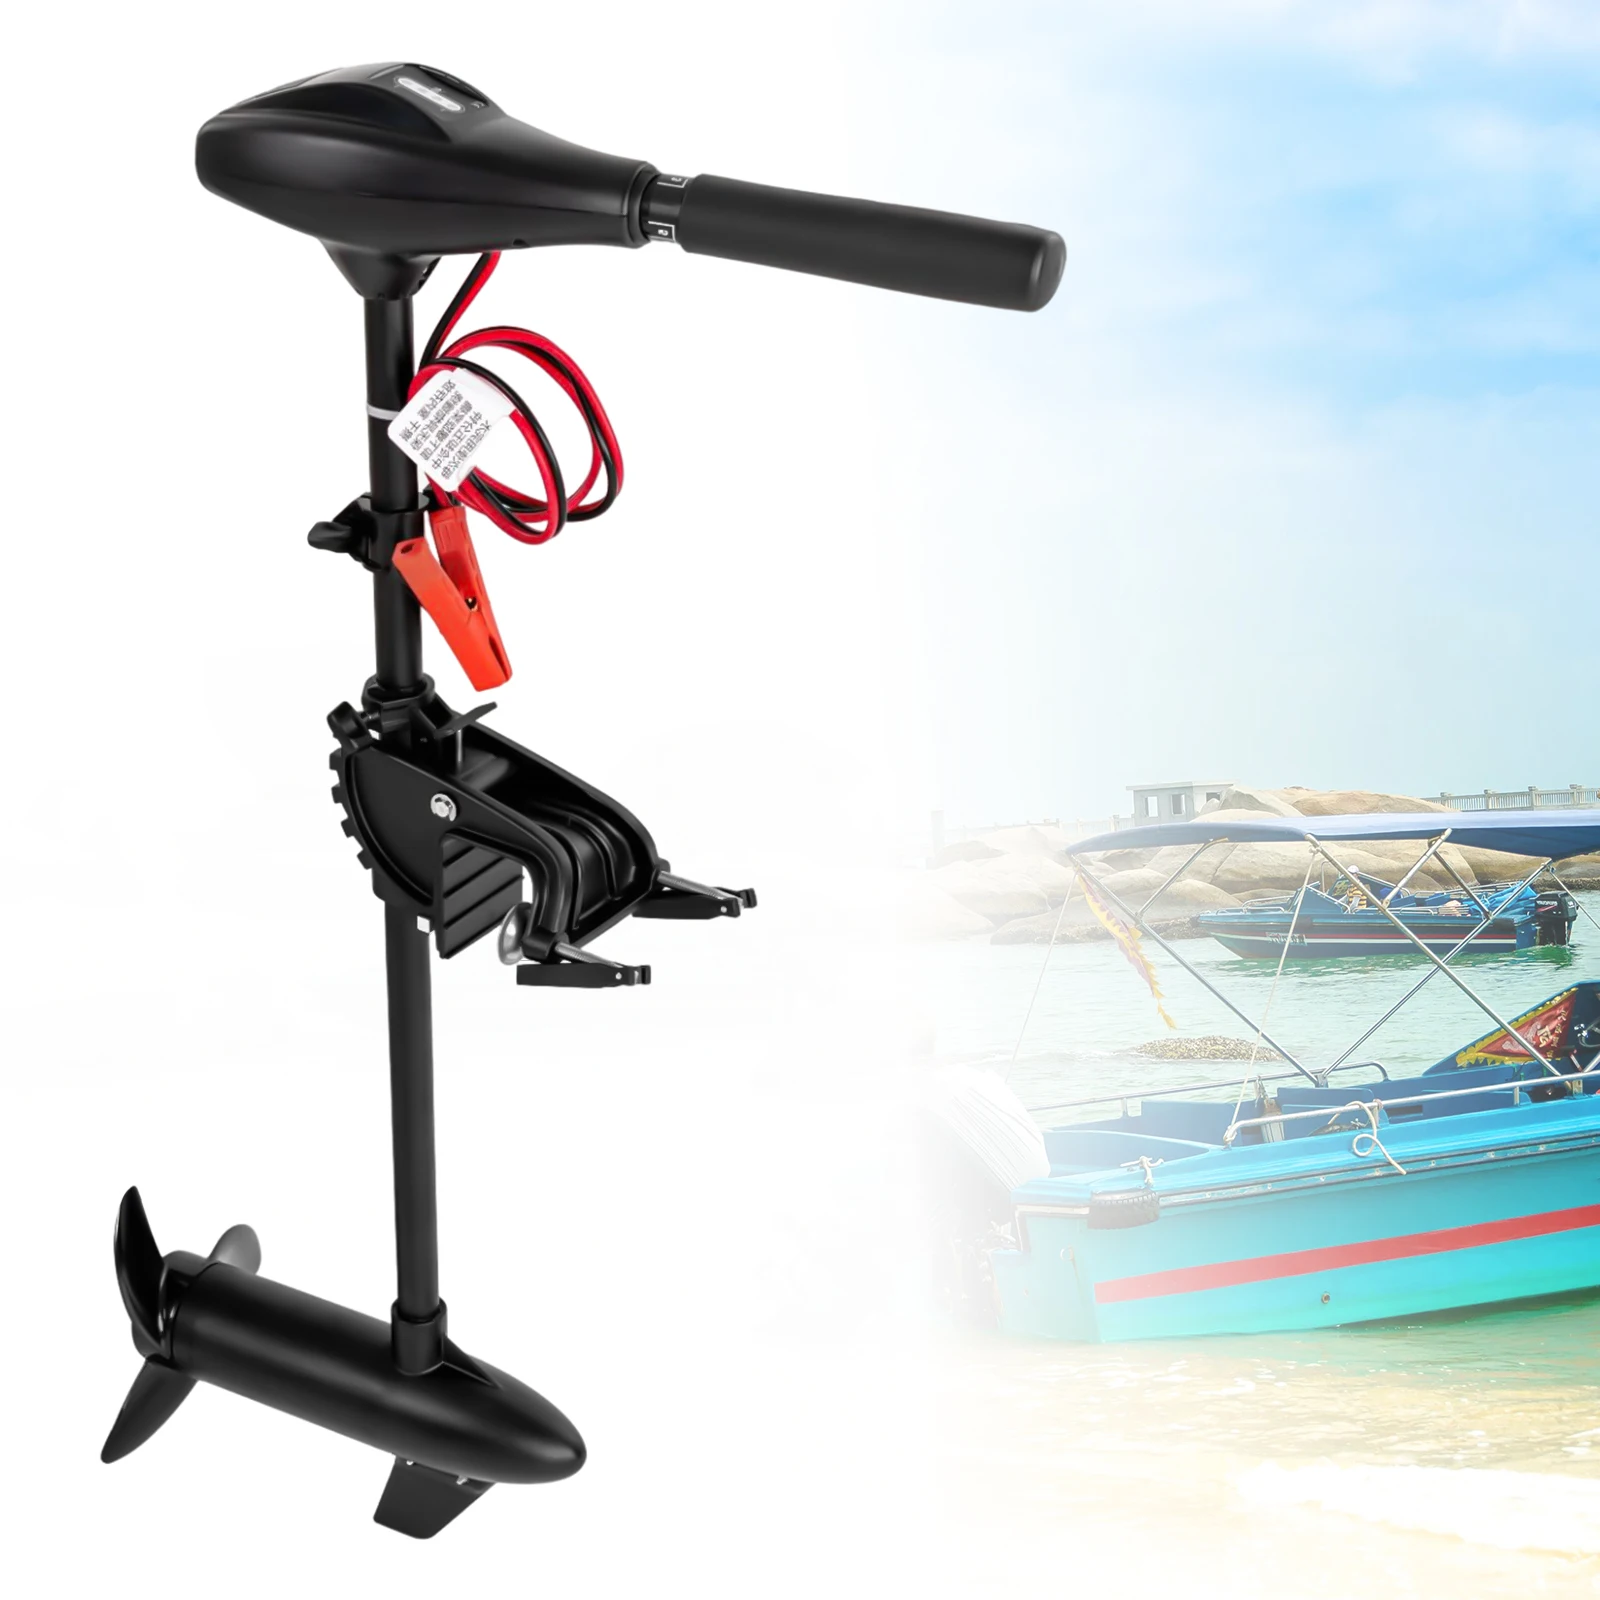 12V 58LB Thrust Electric Trolling Motor Outboard Engine For Fishing/ Inflatable Boats Brush Motor Propeller Strong Powe new portable 12v 120000mah rechargeable li ion battery for led lamp light backup powe etc charger